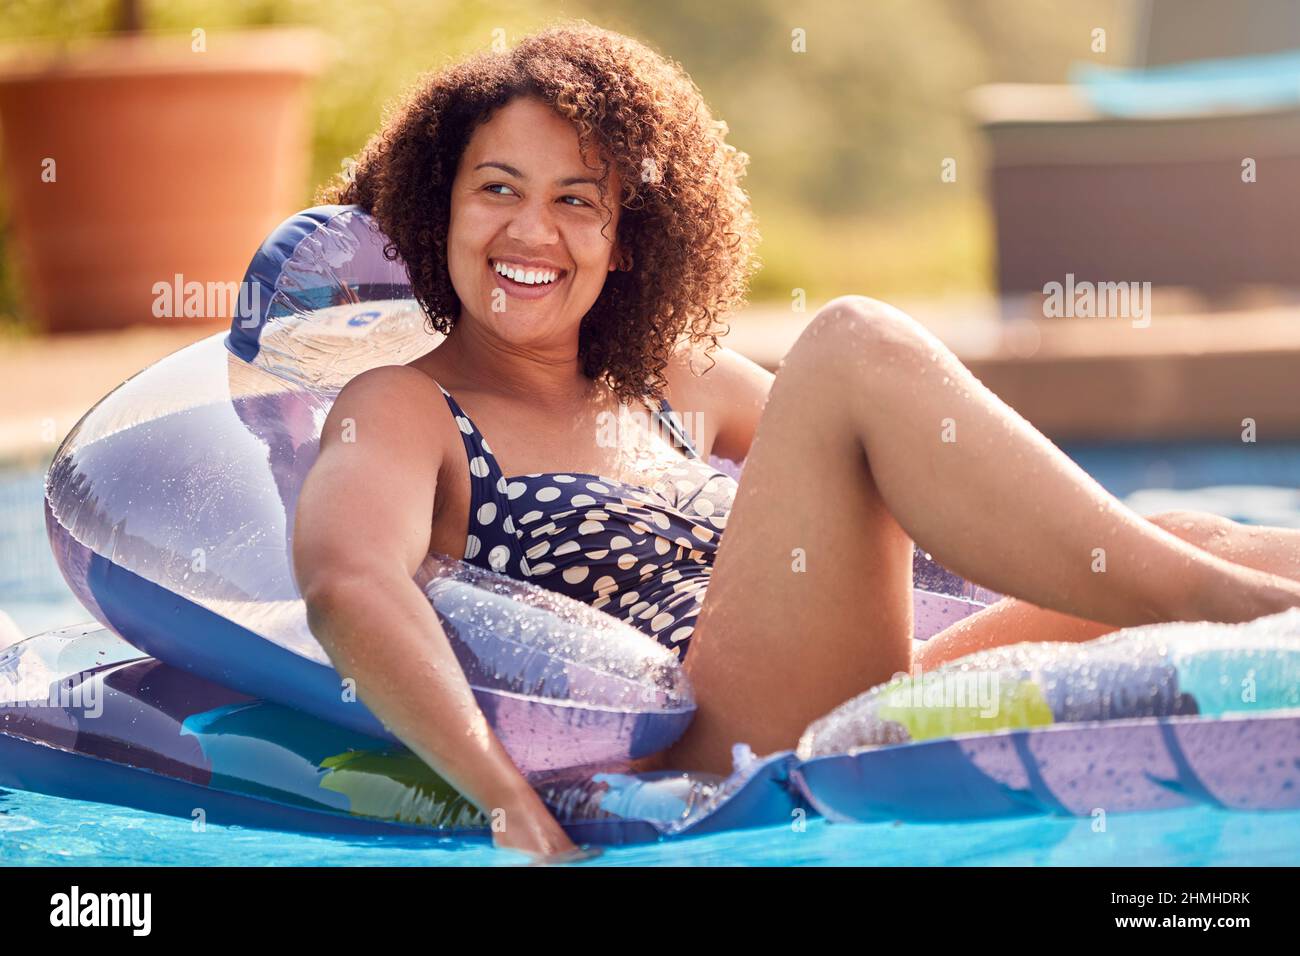 Woman Relaxing Floating On Inflatable In Swimming Pool On Summer Vacation Stock Photo